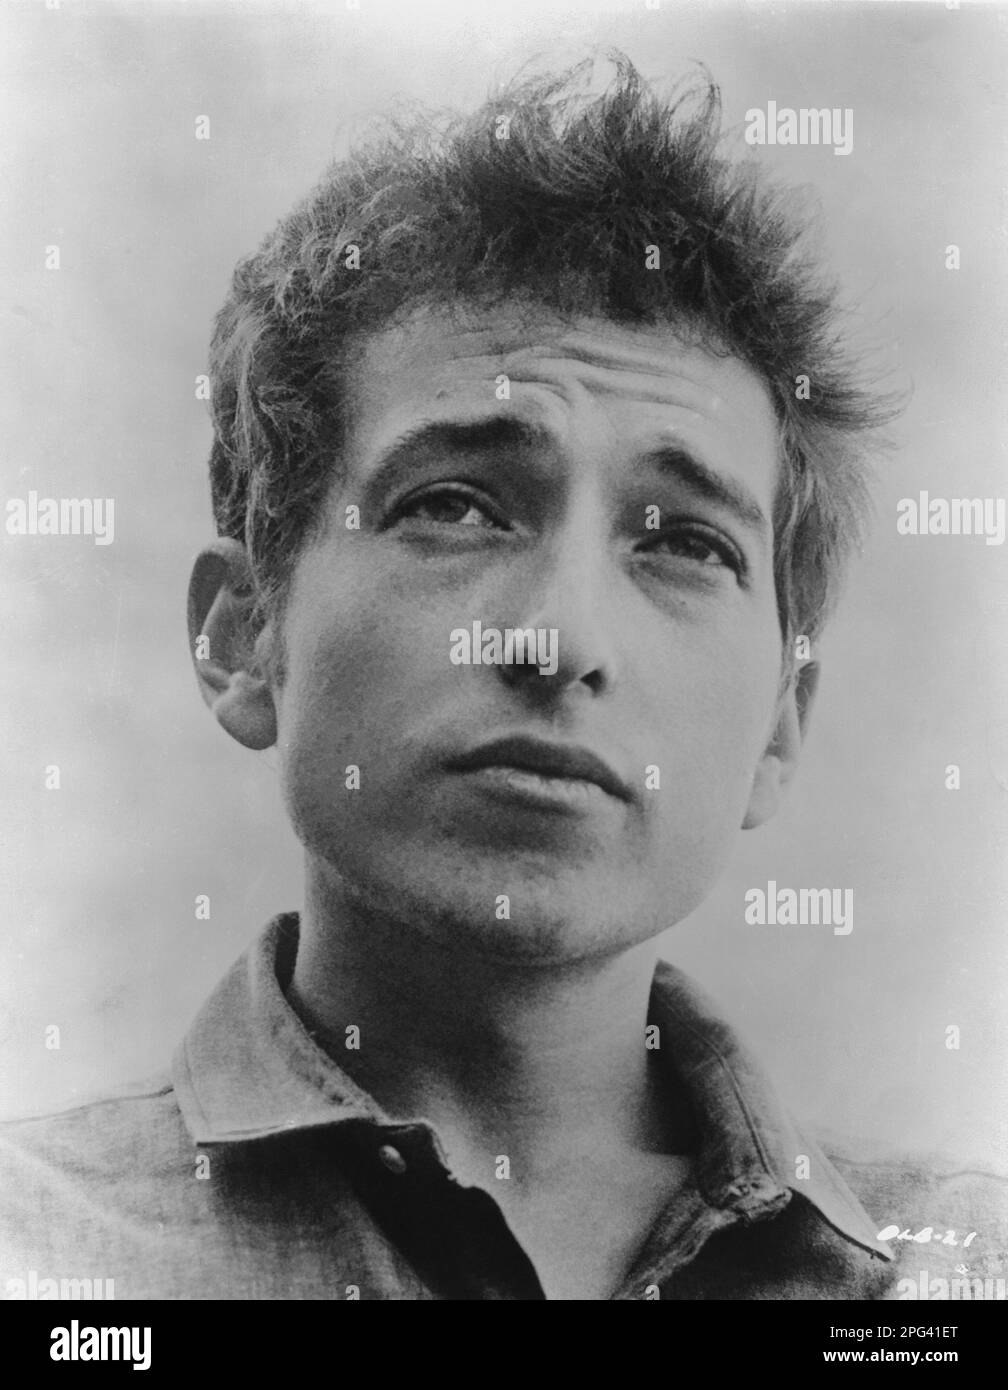 American singer, songwriter, Bob Dylan on stage performing Stock Photo